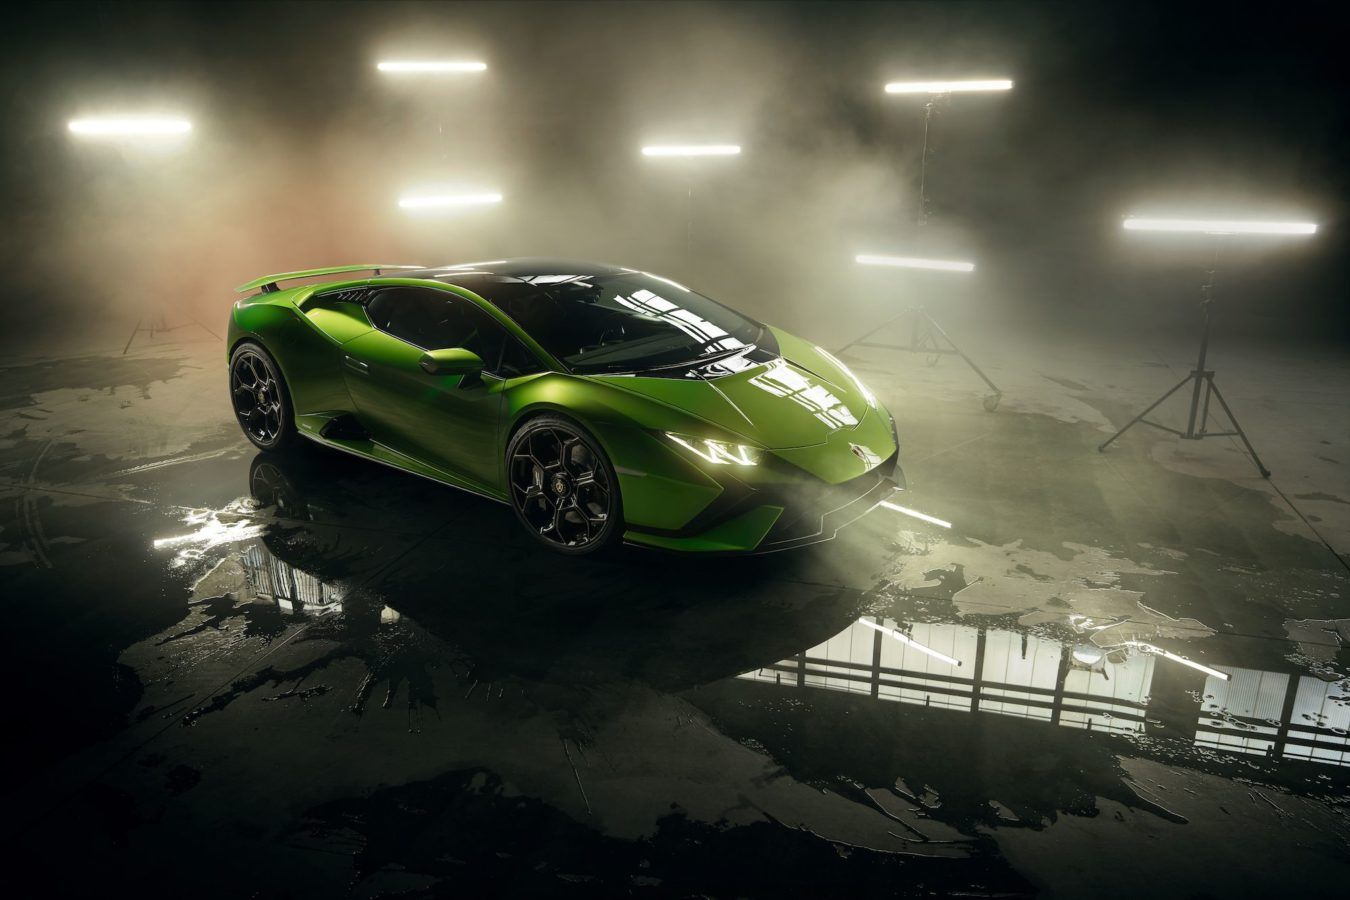 Lamborghini's 631-HP Huracan Tecnica is built for road and track